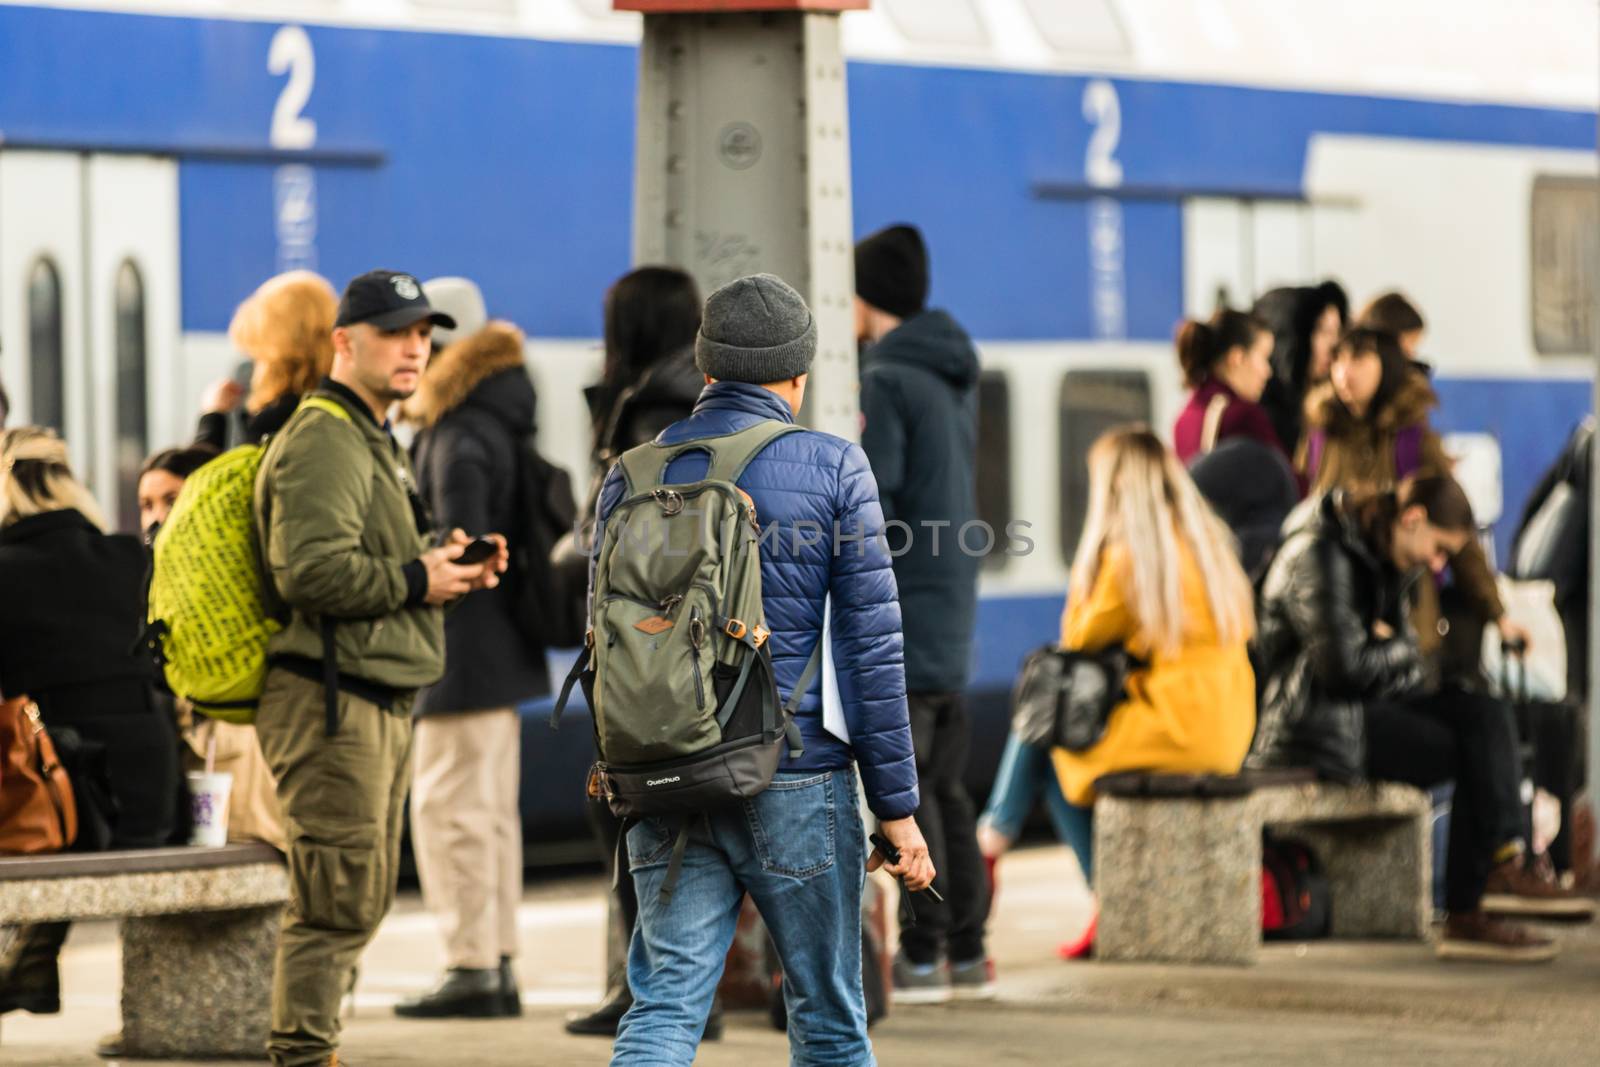 Travelers and commuters carry luggage and backpacks on the train by vladispas